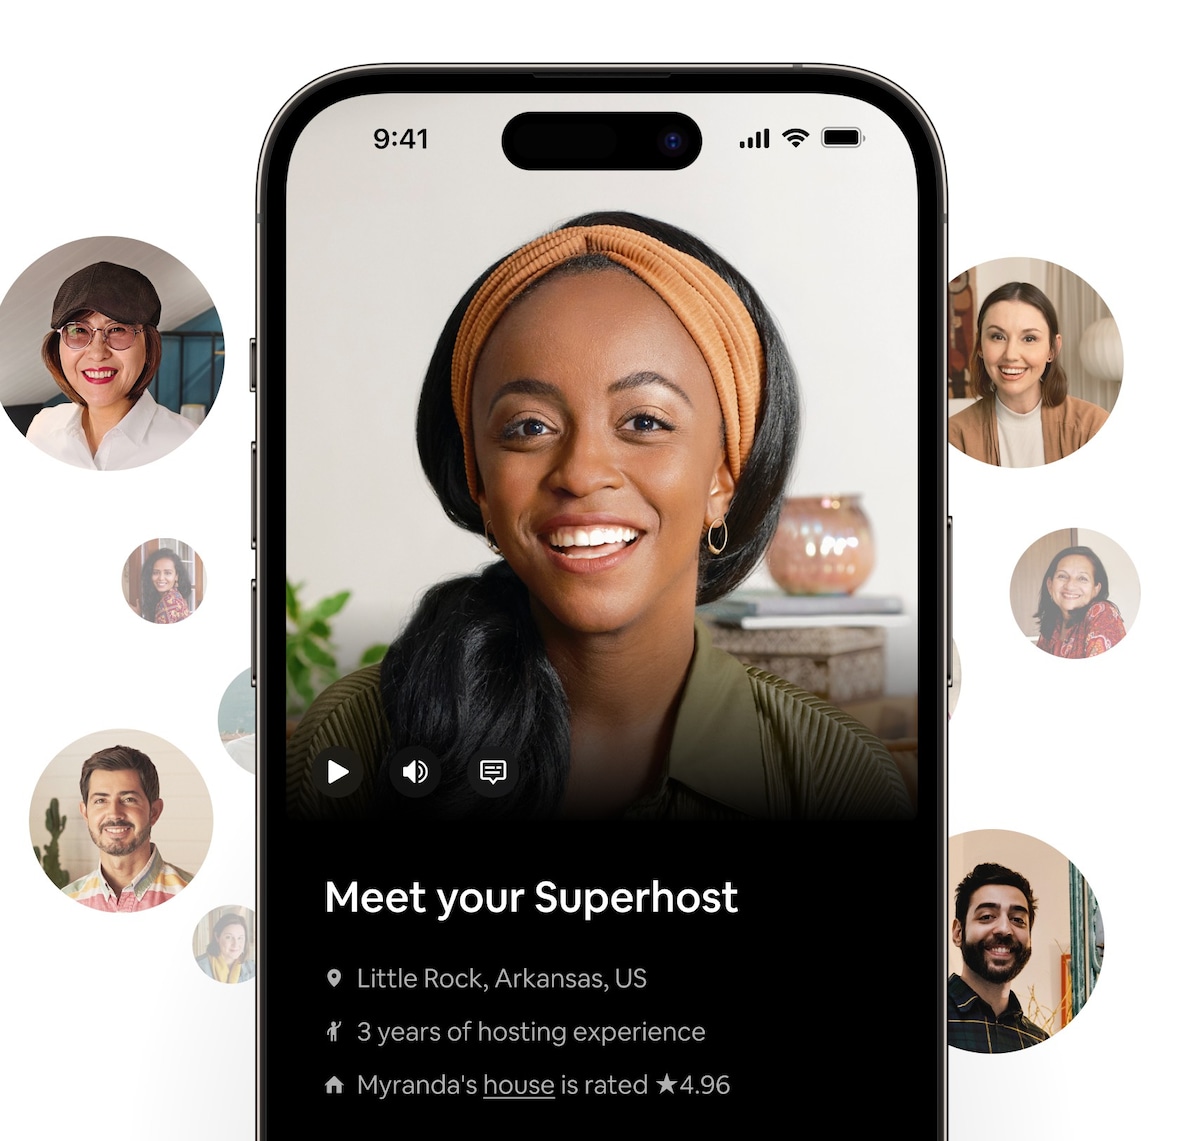 A smiling Superhost in the Airbnb app. Text informs us that her name is Myranda, she has three years’ experience hosting in Little Rock and her Airbnb rating is 4.96 stars out of 5.